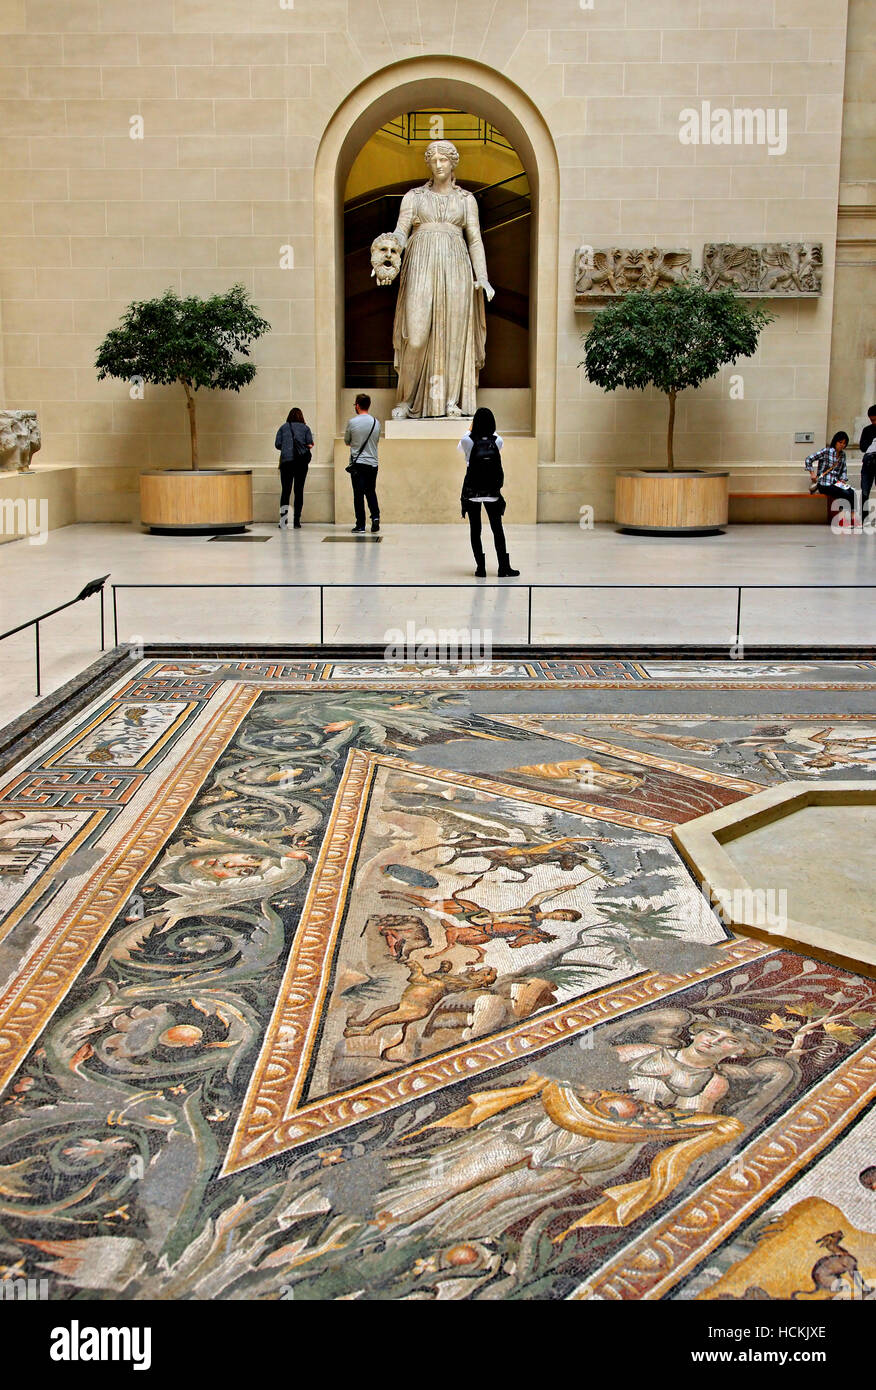 The Sphinx courtyard, with the 'Seasons' mosaic floor and a statue of Melpomene, Denon wing, Louvre museum, Paris, France. Stock Photo